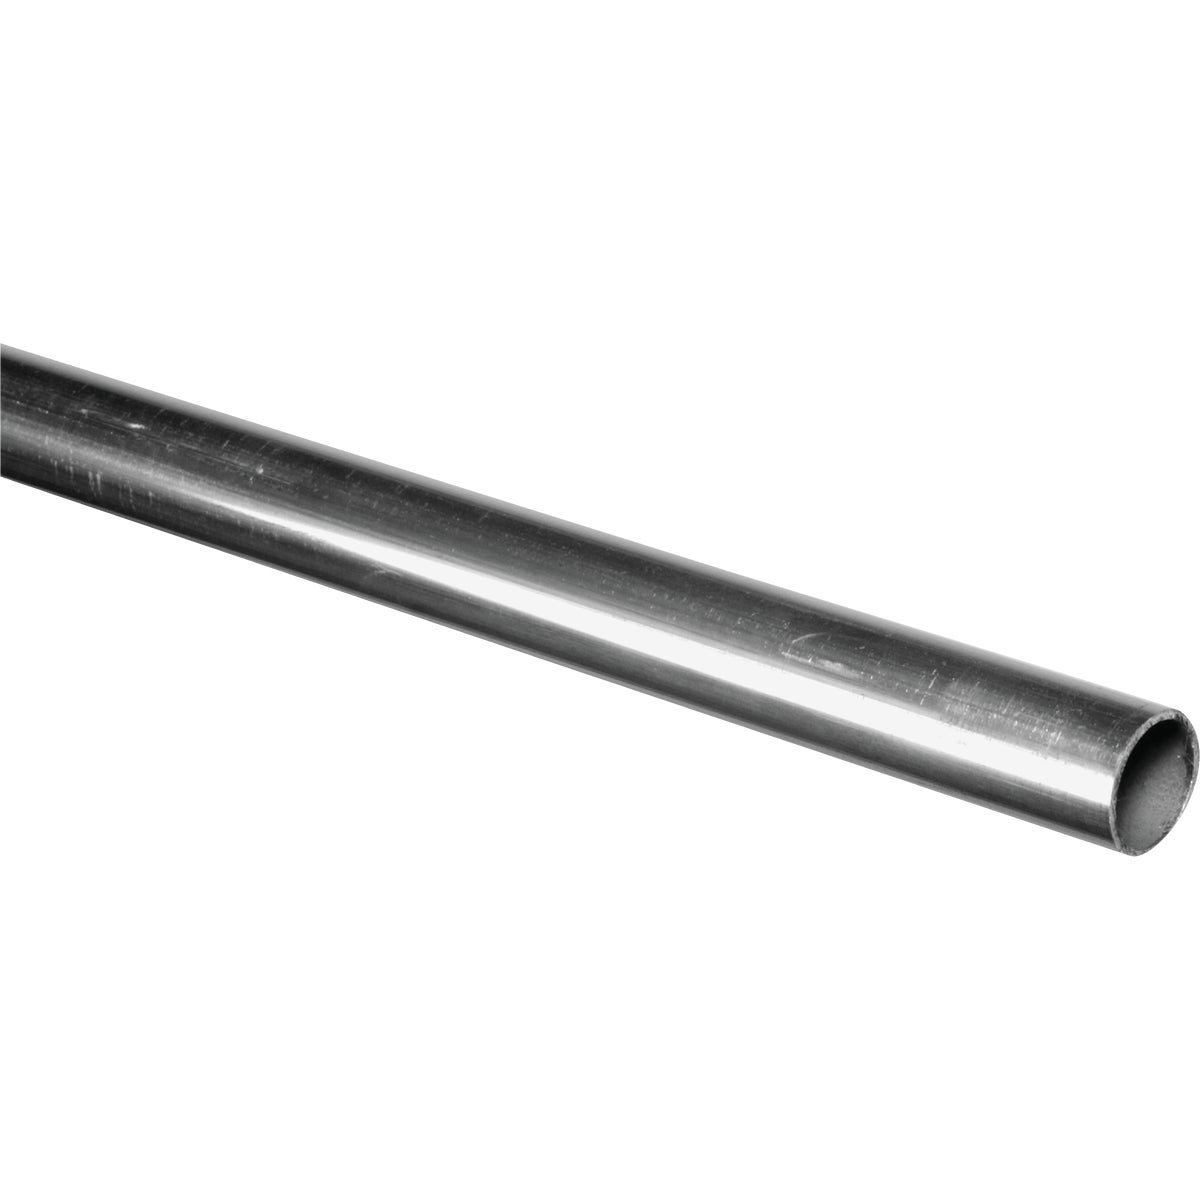 Item 766944, Aluminum round tubes are ideal for fence repairs, key stock, handles and 